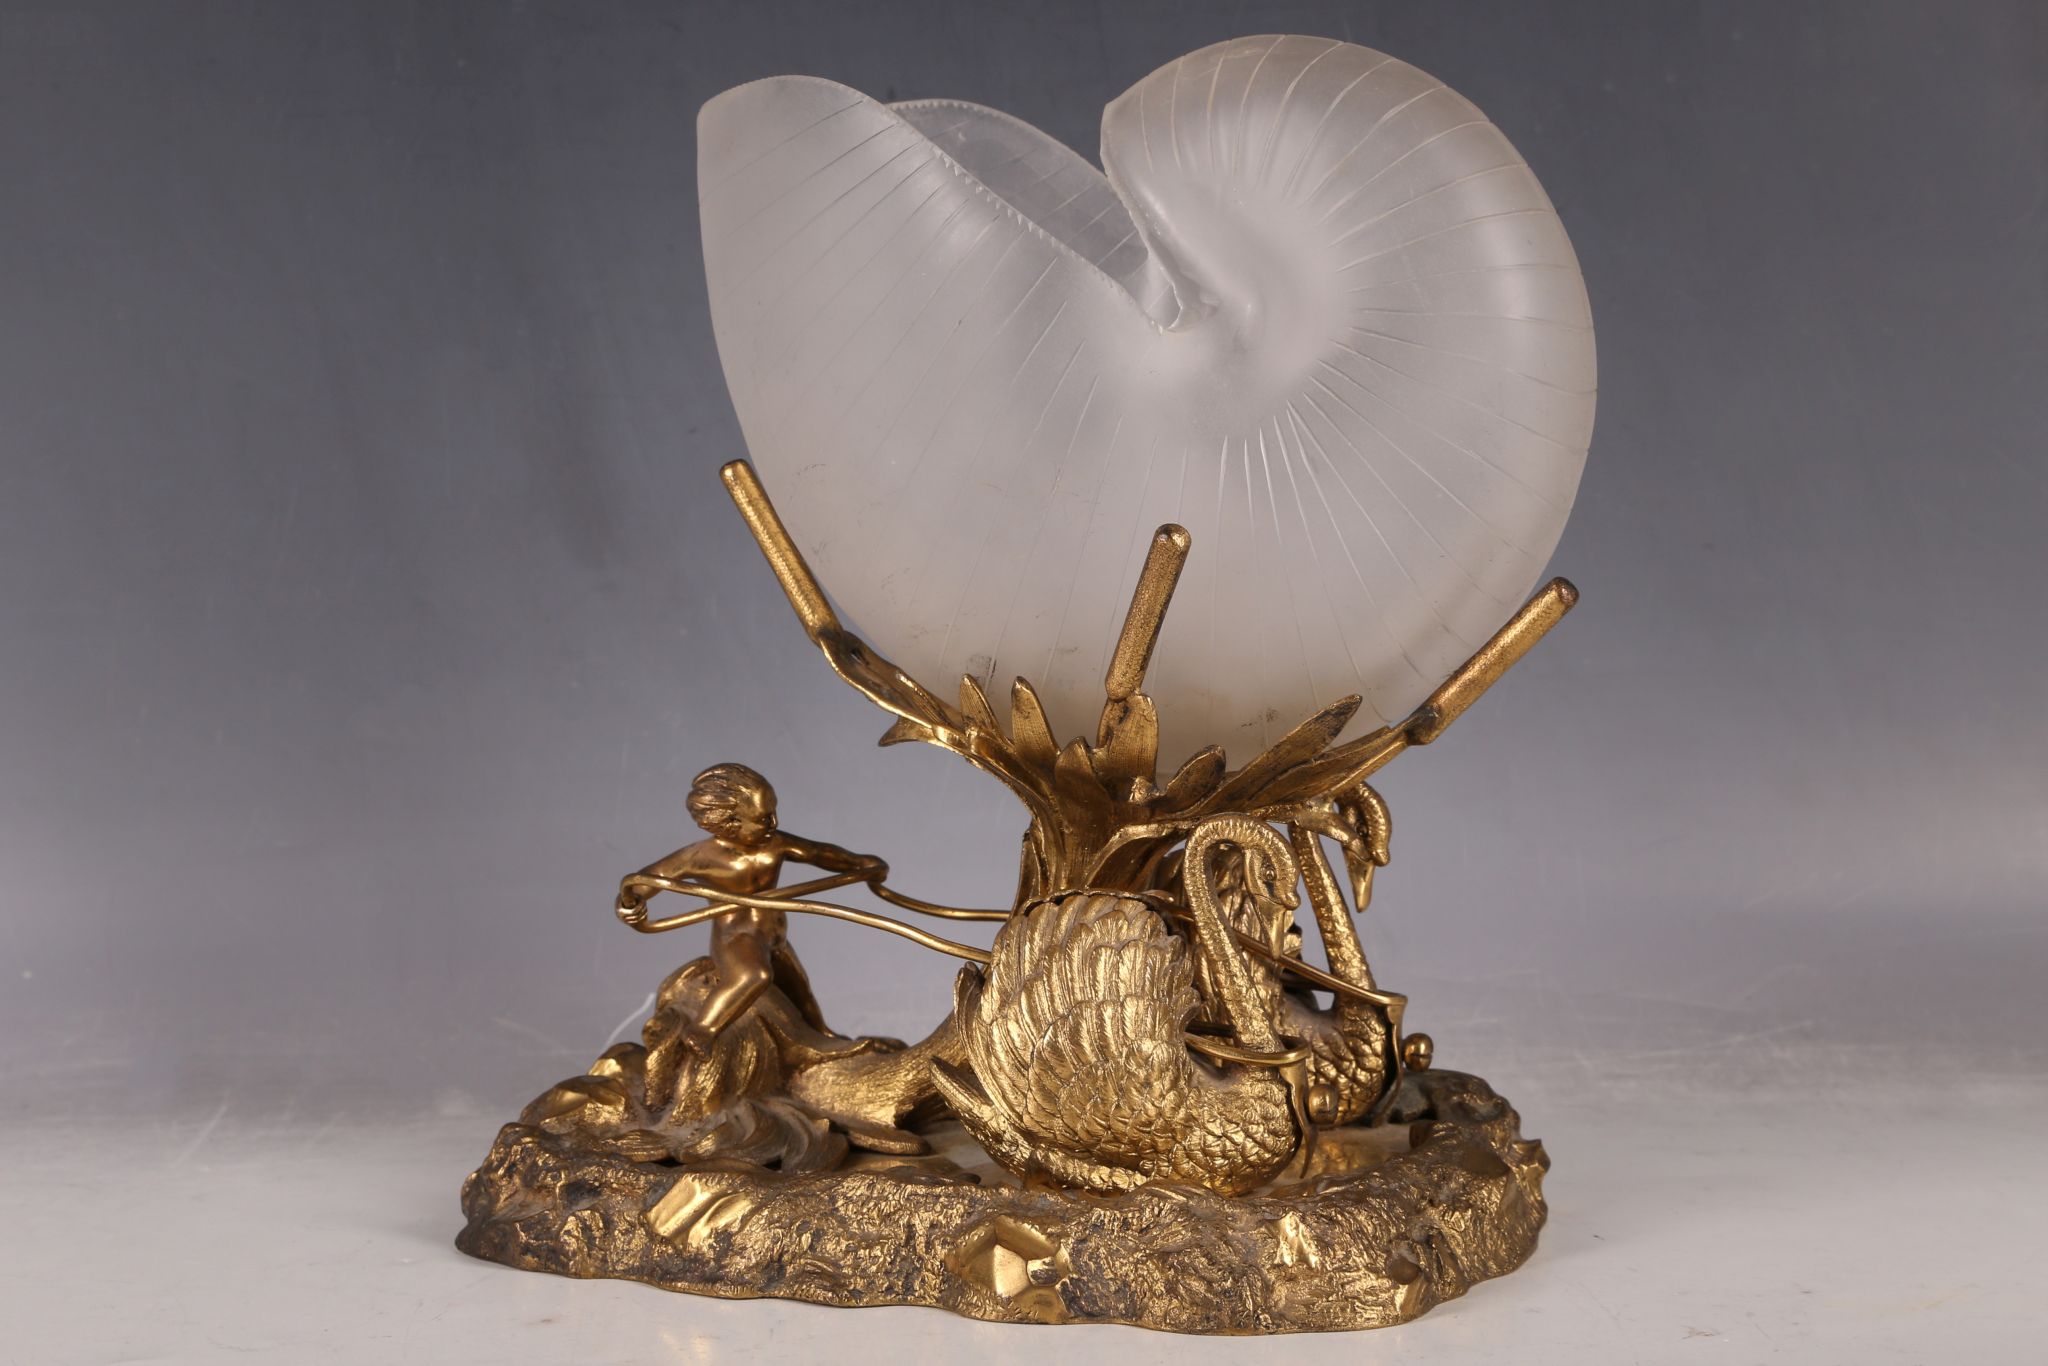 A decorative 19th Century gilt metal table ornament in Palais Royale style, modelled as a cherub and